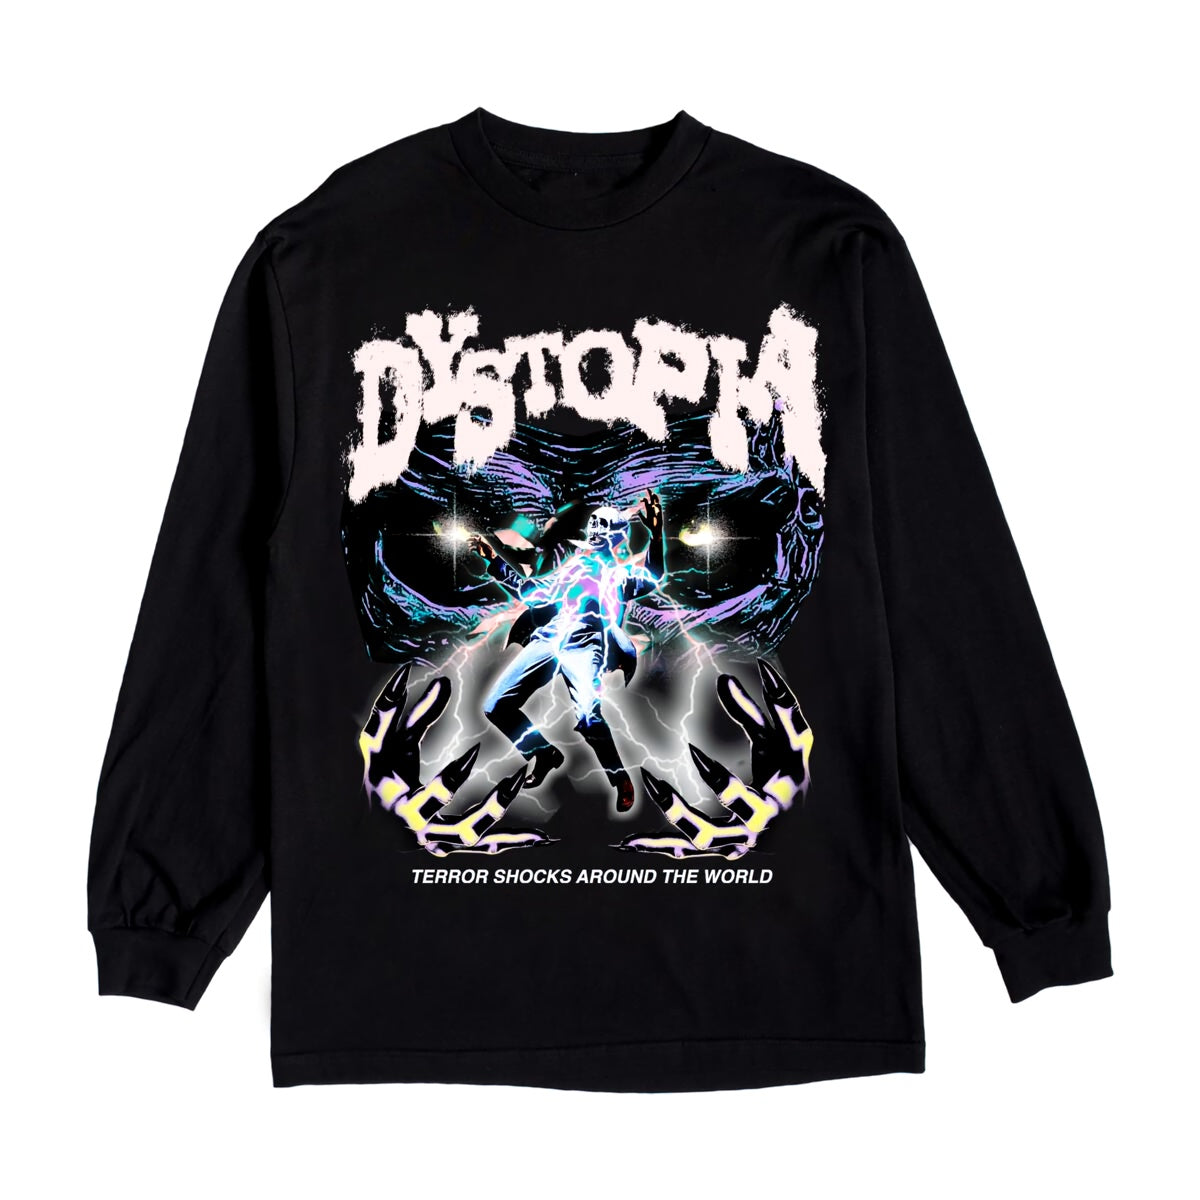 Lonely Hearts Club Dystopia Long Sleeve T-shirt